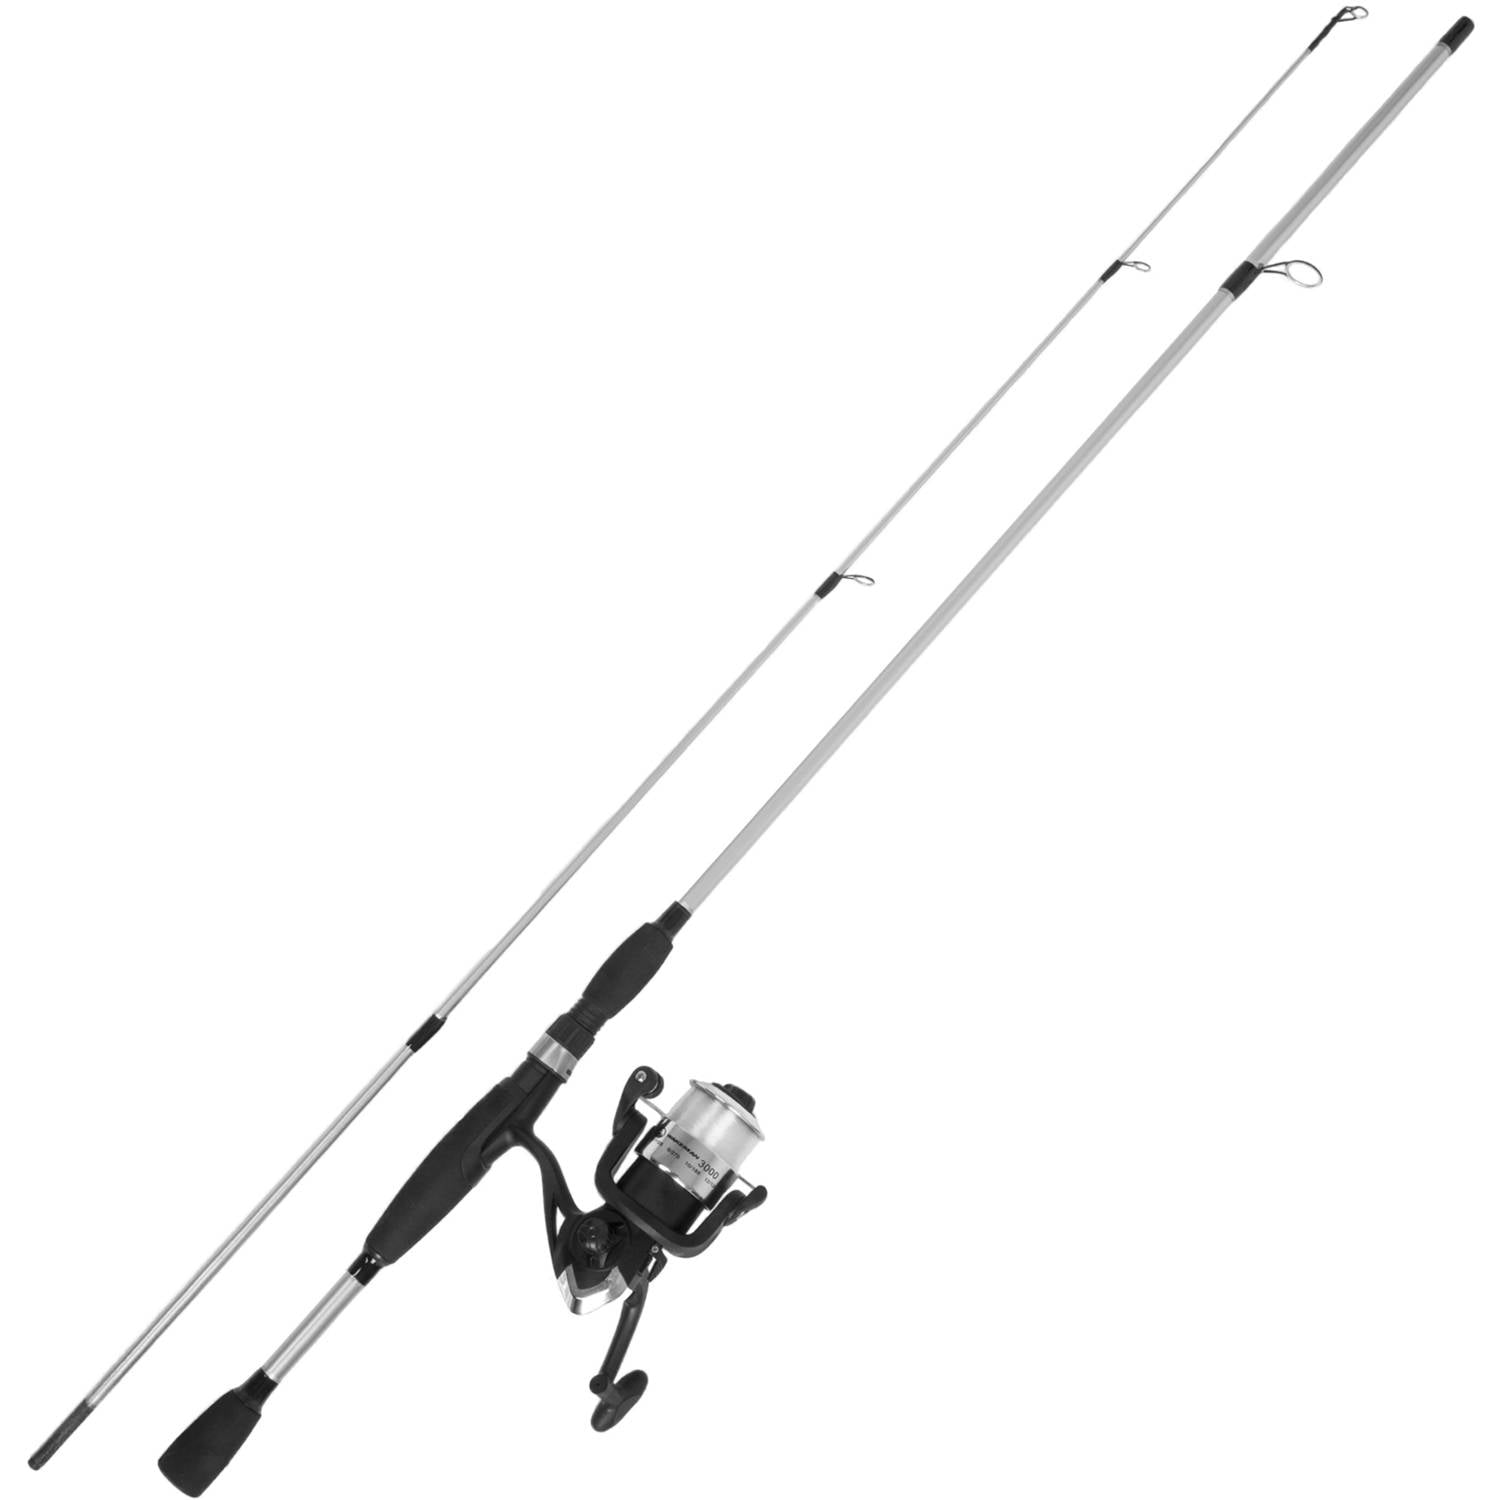 Fishing Rod & Reel Combo- 6’6” Carbon Pole, Spinning Reel & Golf Grip  Handle- Bass, Trout & Lake Fish- Channel Series by Wakeman Outdoors